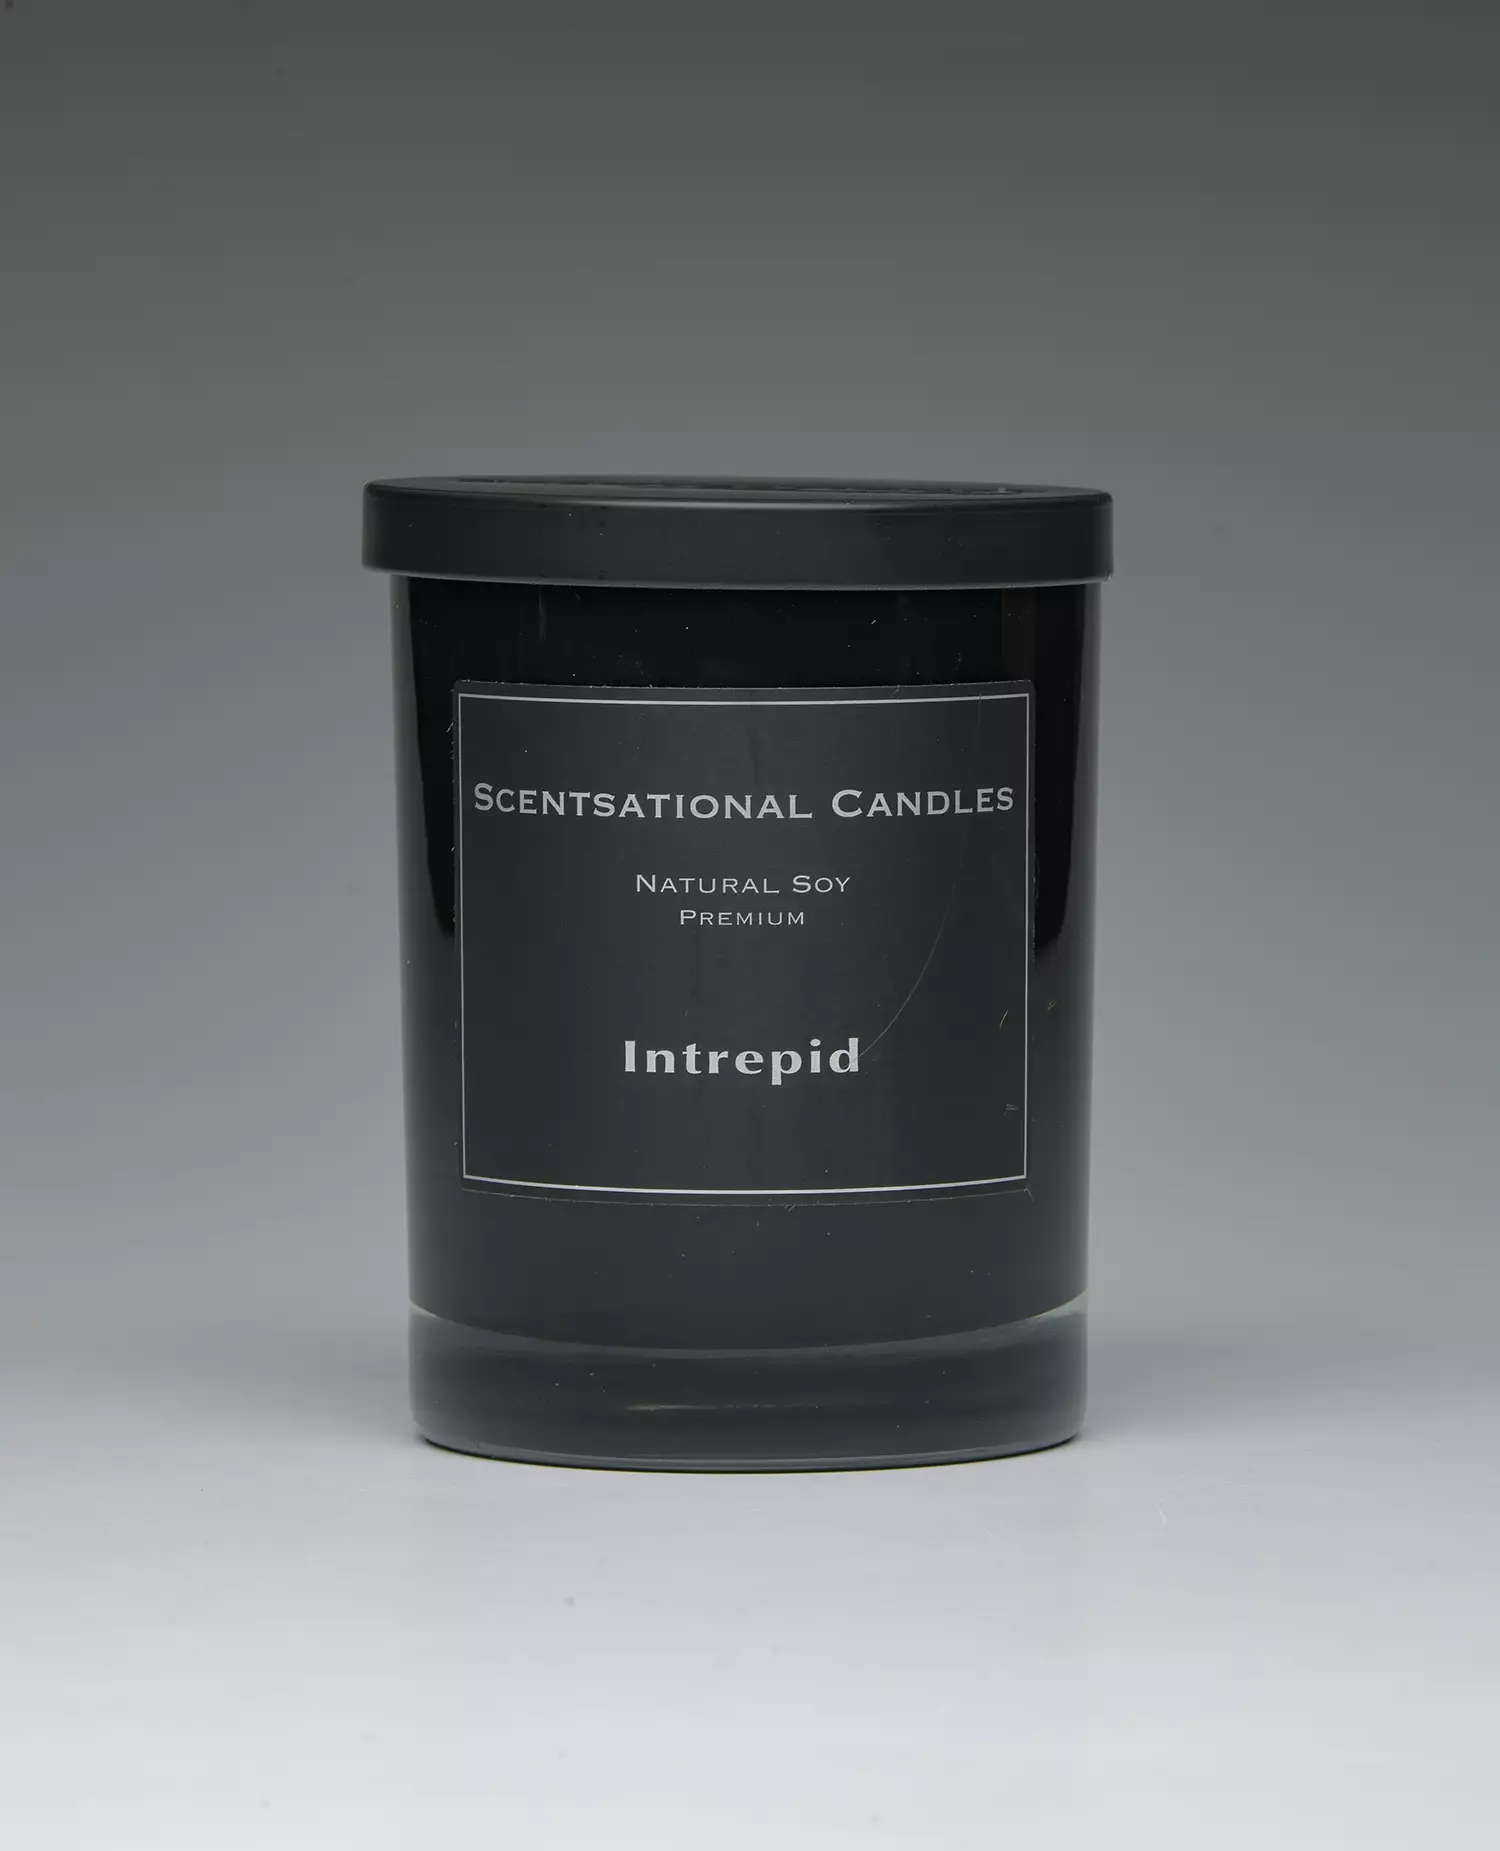 Intrepid - 11oz scented candle